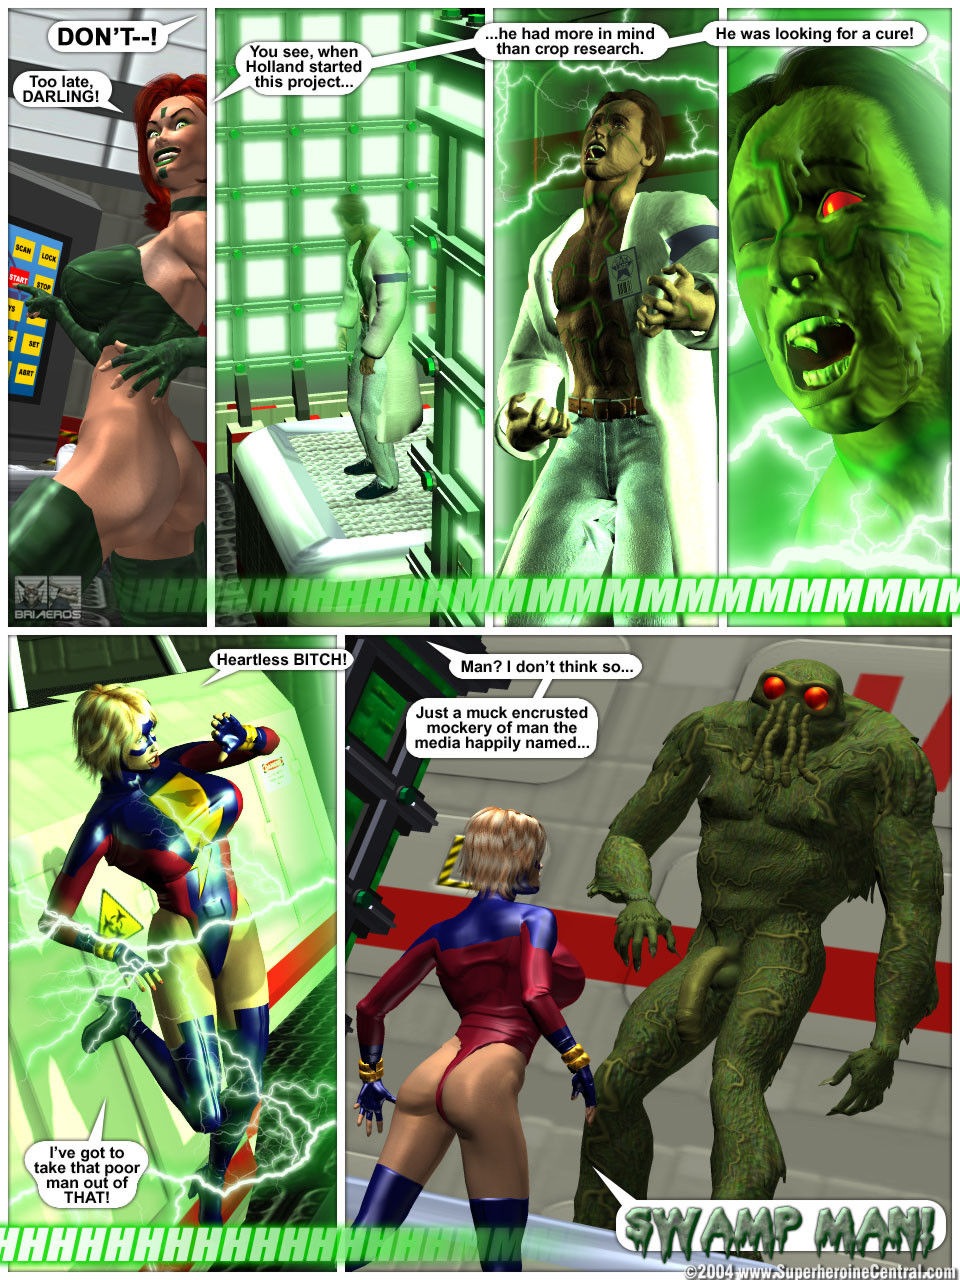 Tall To Arouse - Inside a Green Hell - Superheroinecentral page 12